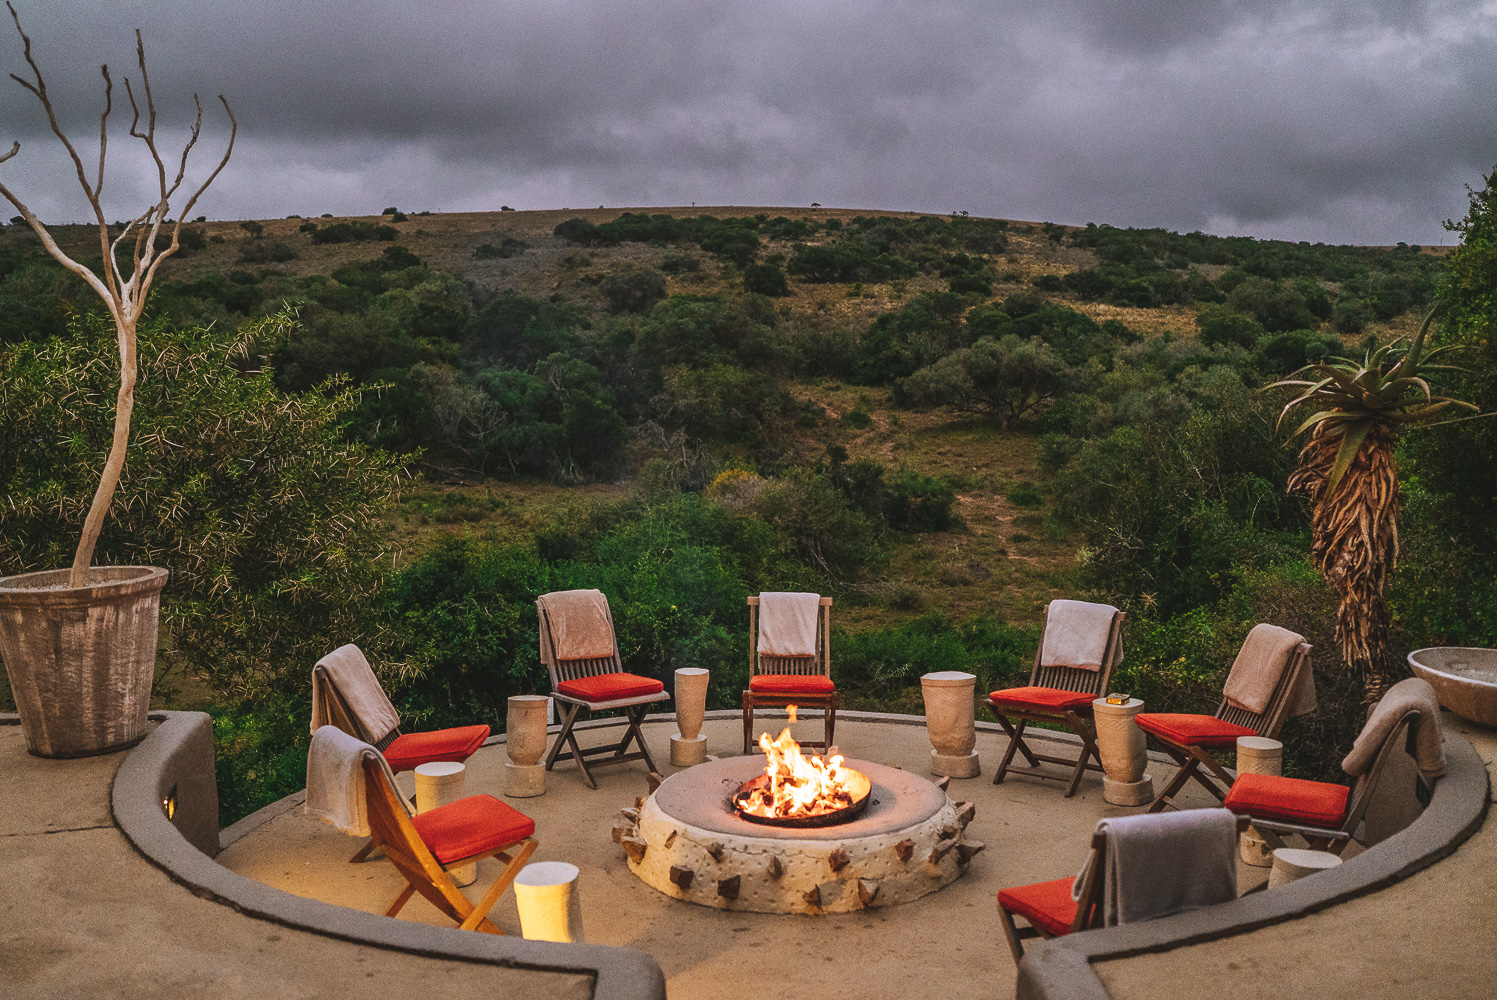 Fire pit at the At the Amakhala Safari Lodge, safari lodges in South Africa